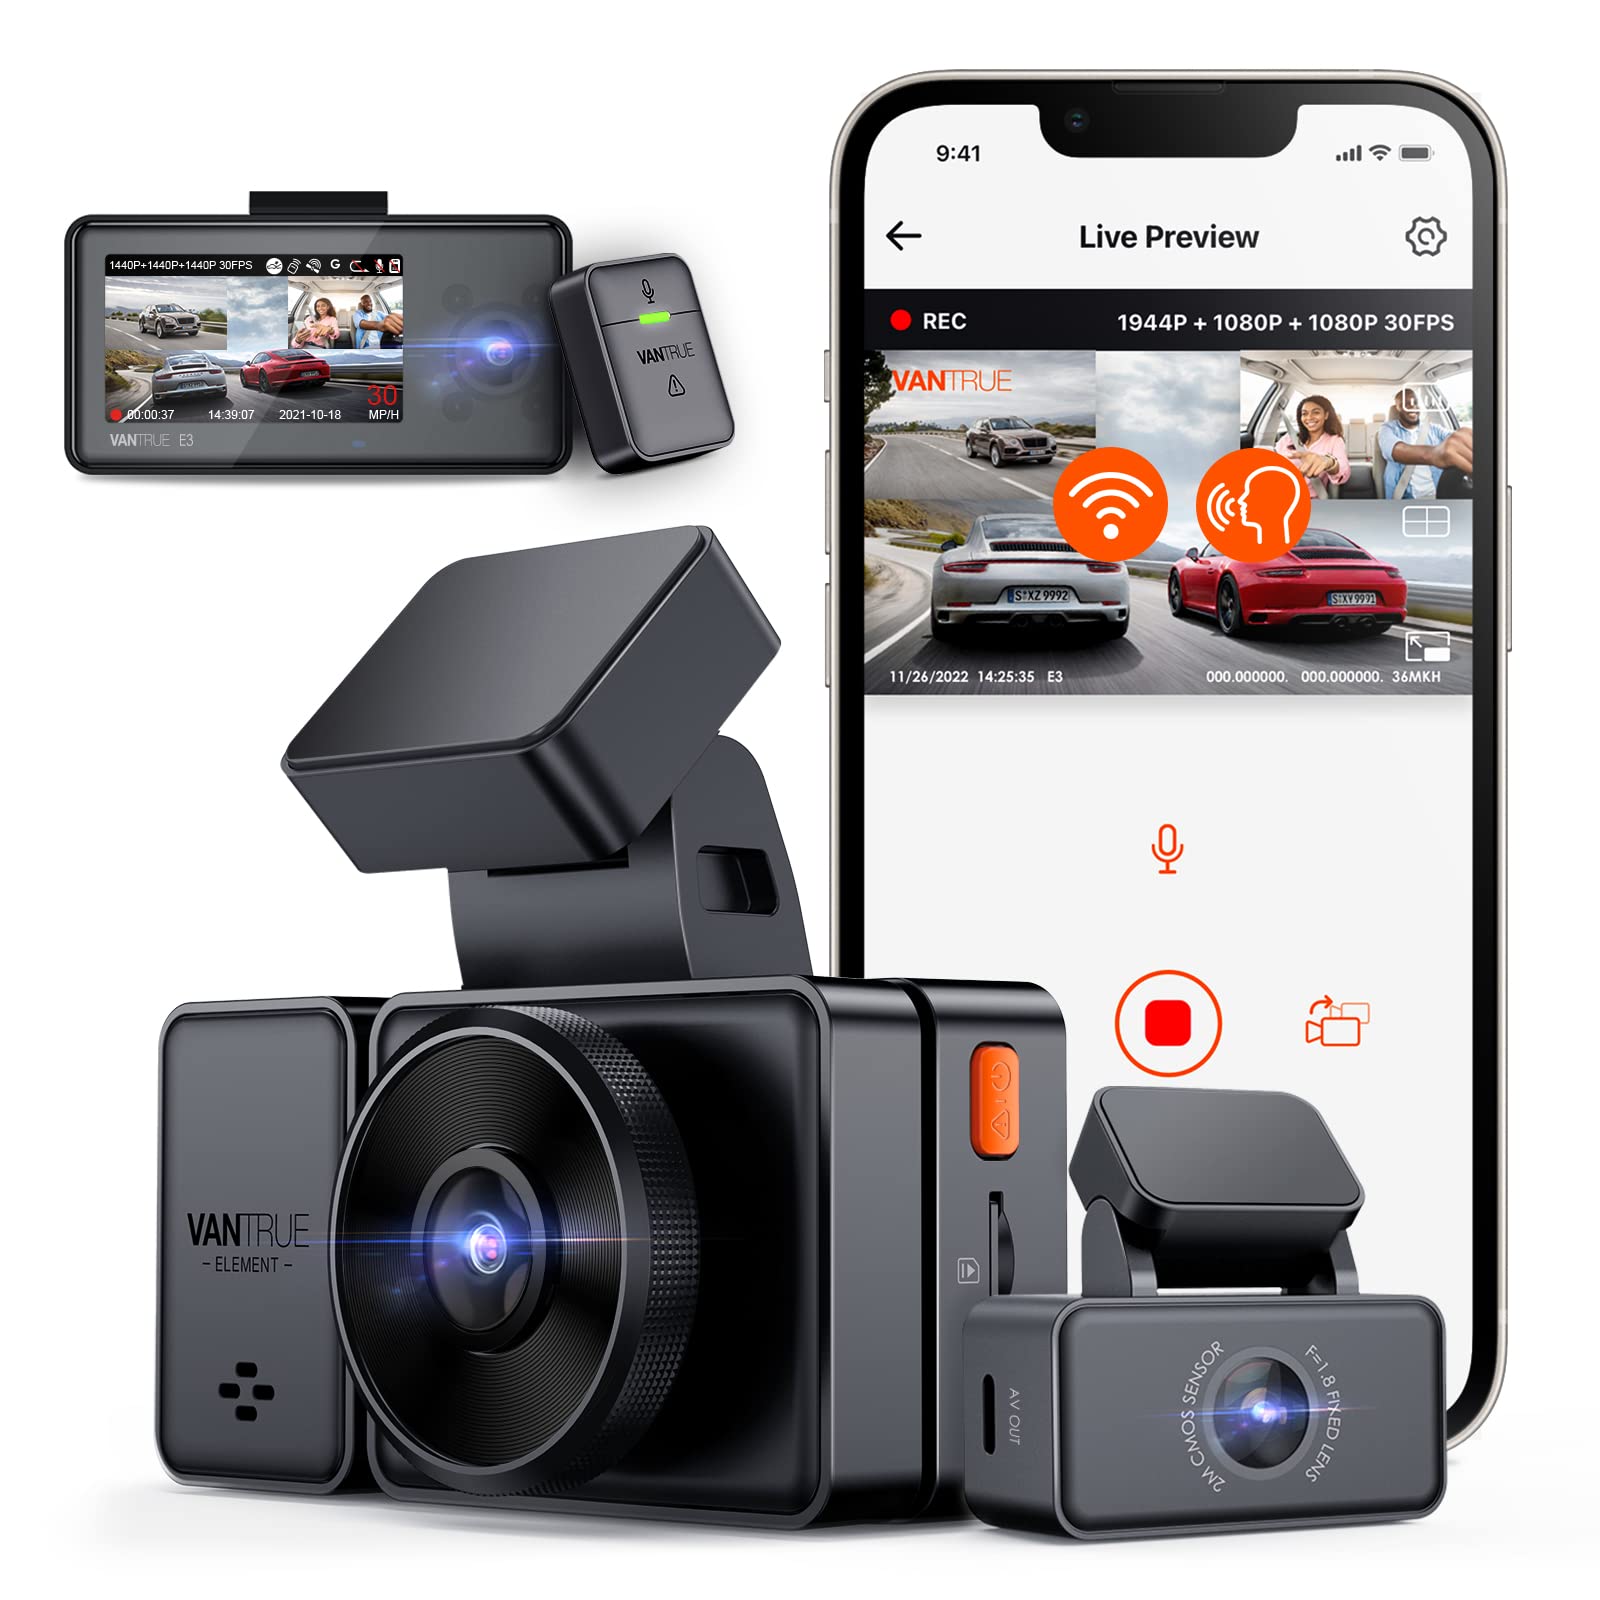 Vantrue E3 3 Channel Dash Cam Front and Rear Inside, 3 Way Triple WiFi GPS Dash Camera 2.7K 1944P+1080P+1080P with STARVIS IR Night Vision, Voice Control, 24 Hours Parking Mode, Support 512GB Max